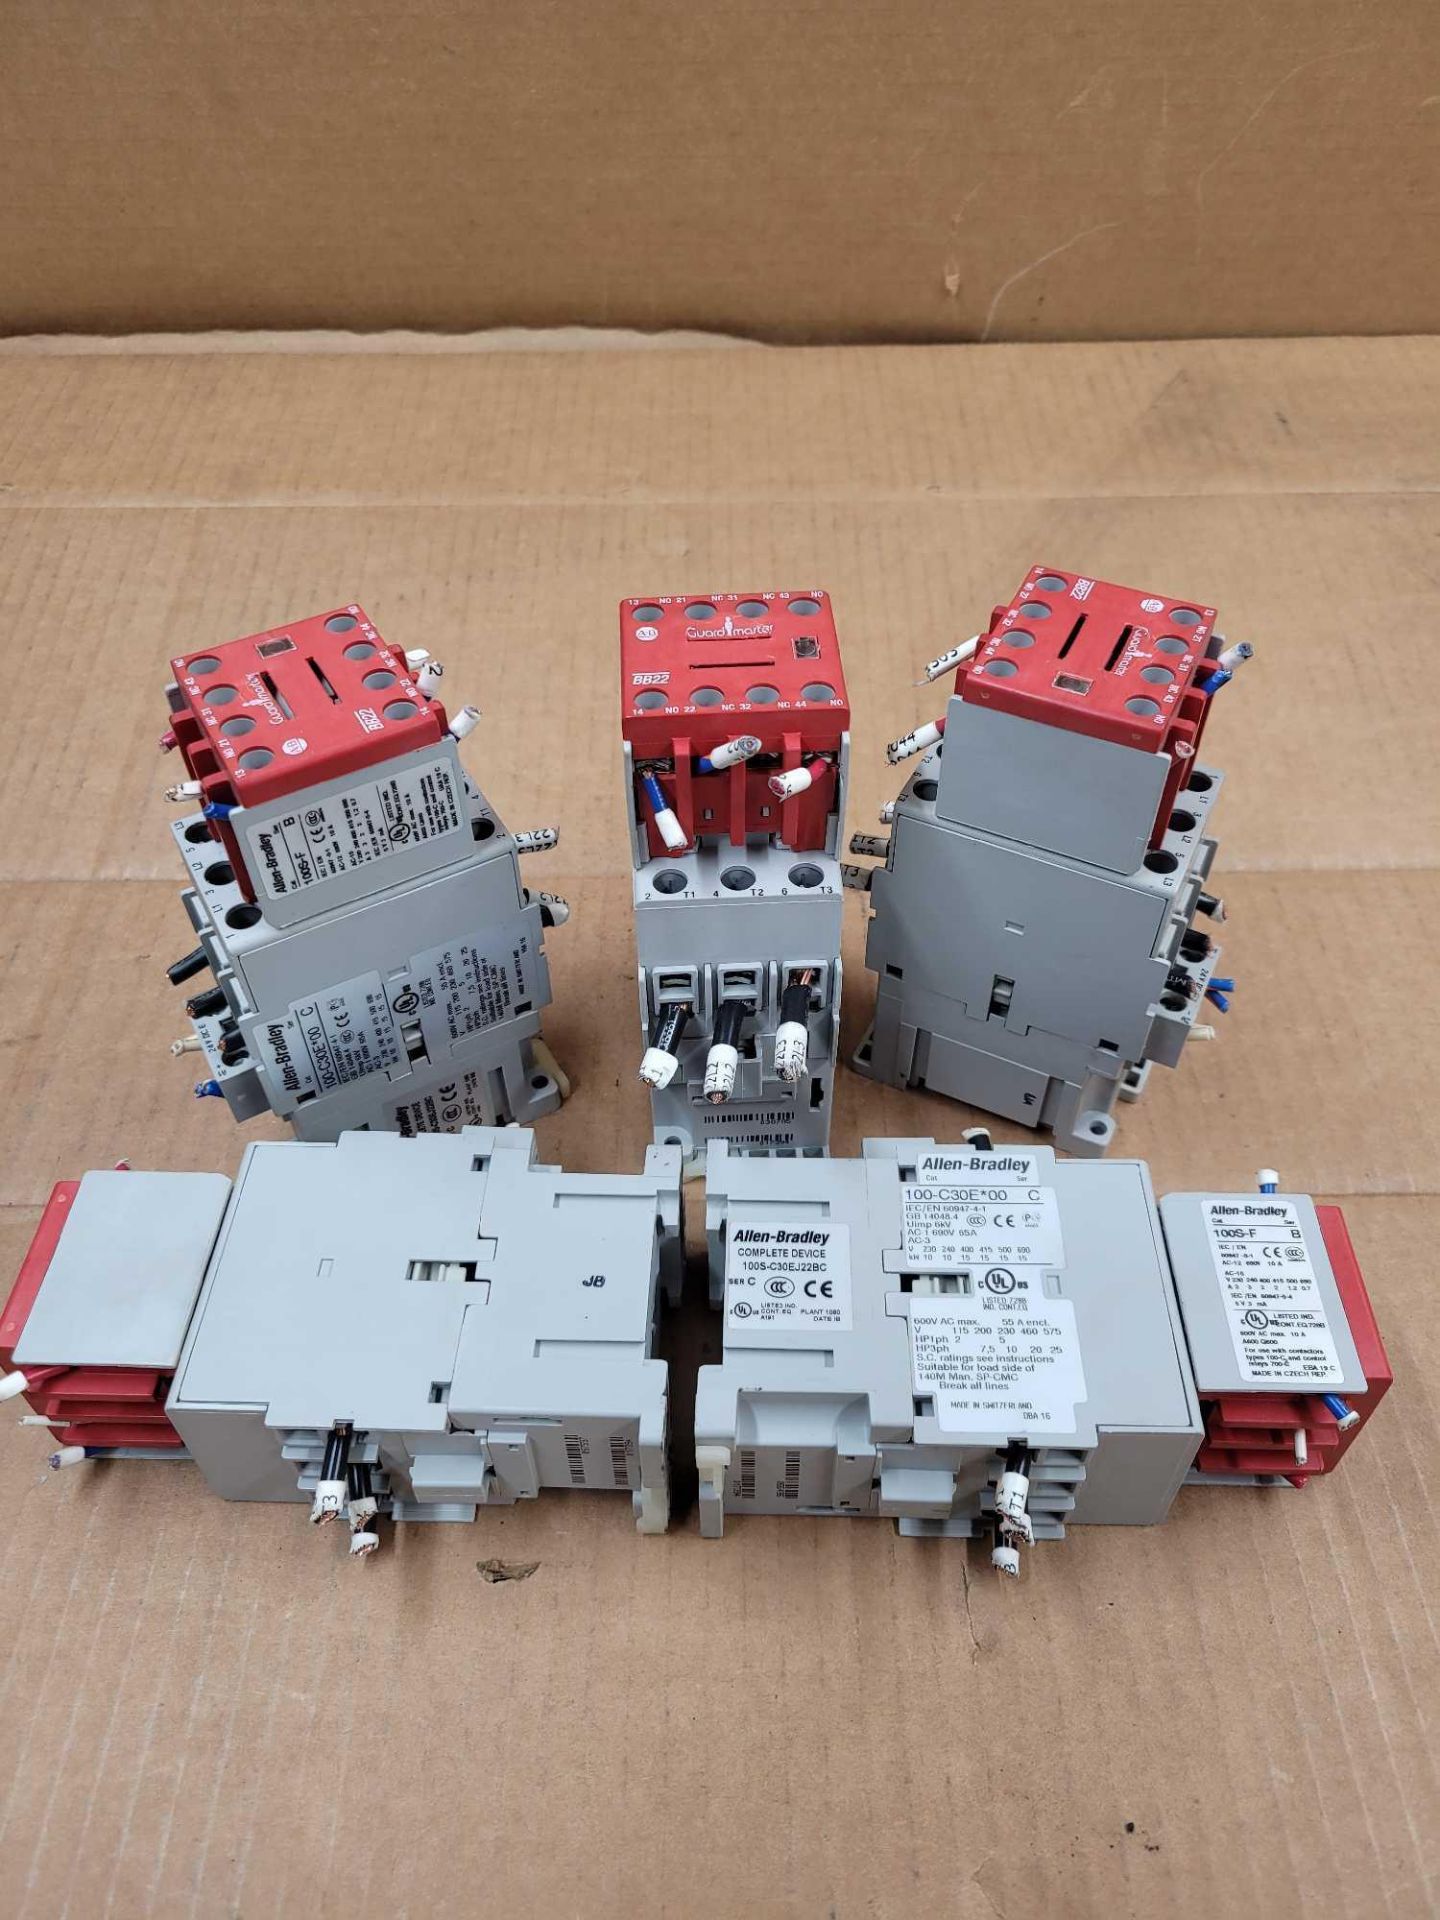 LOT OF 5 ALLEN BRADLEY 100S-C30EJ22BC / Series C Guardmaster Safety Contactor  /  Lot Weight: 6.2 lb - Image 10 of 10